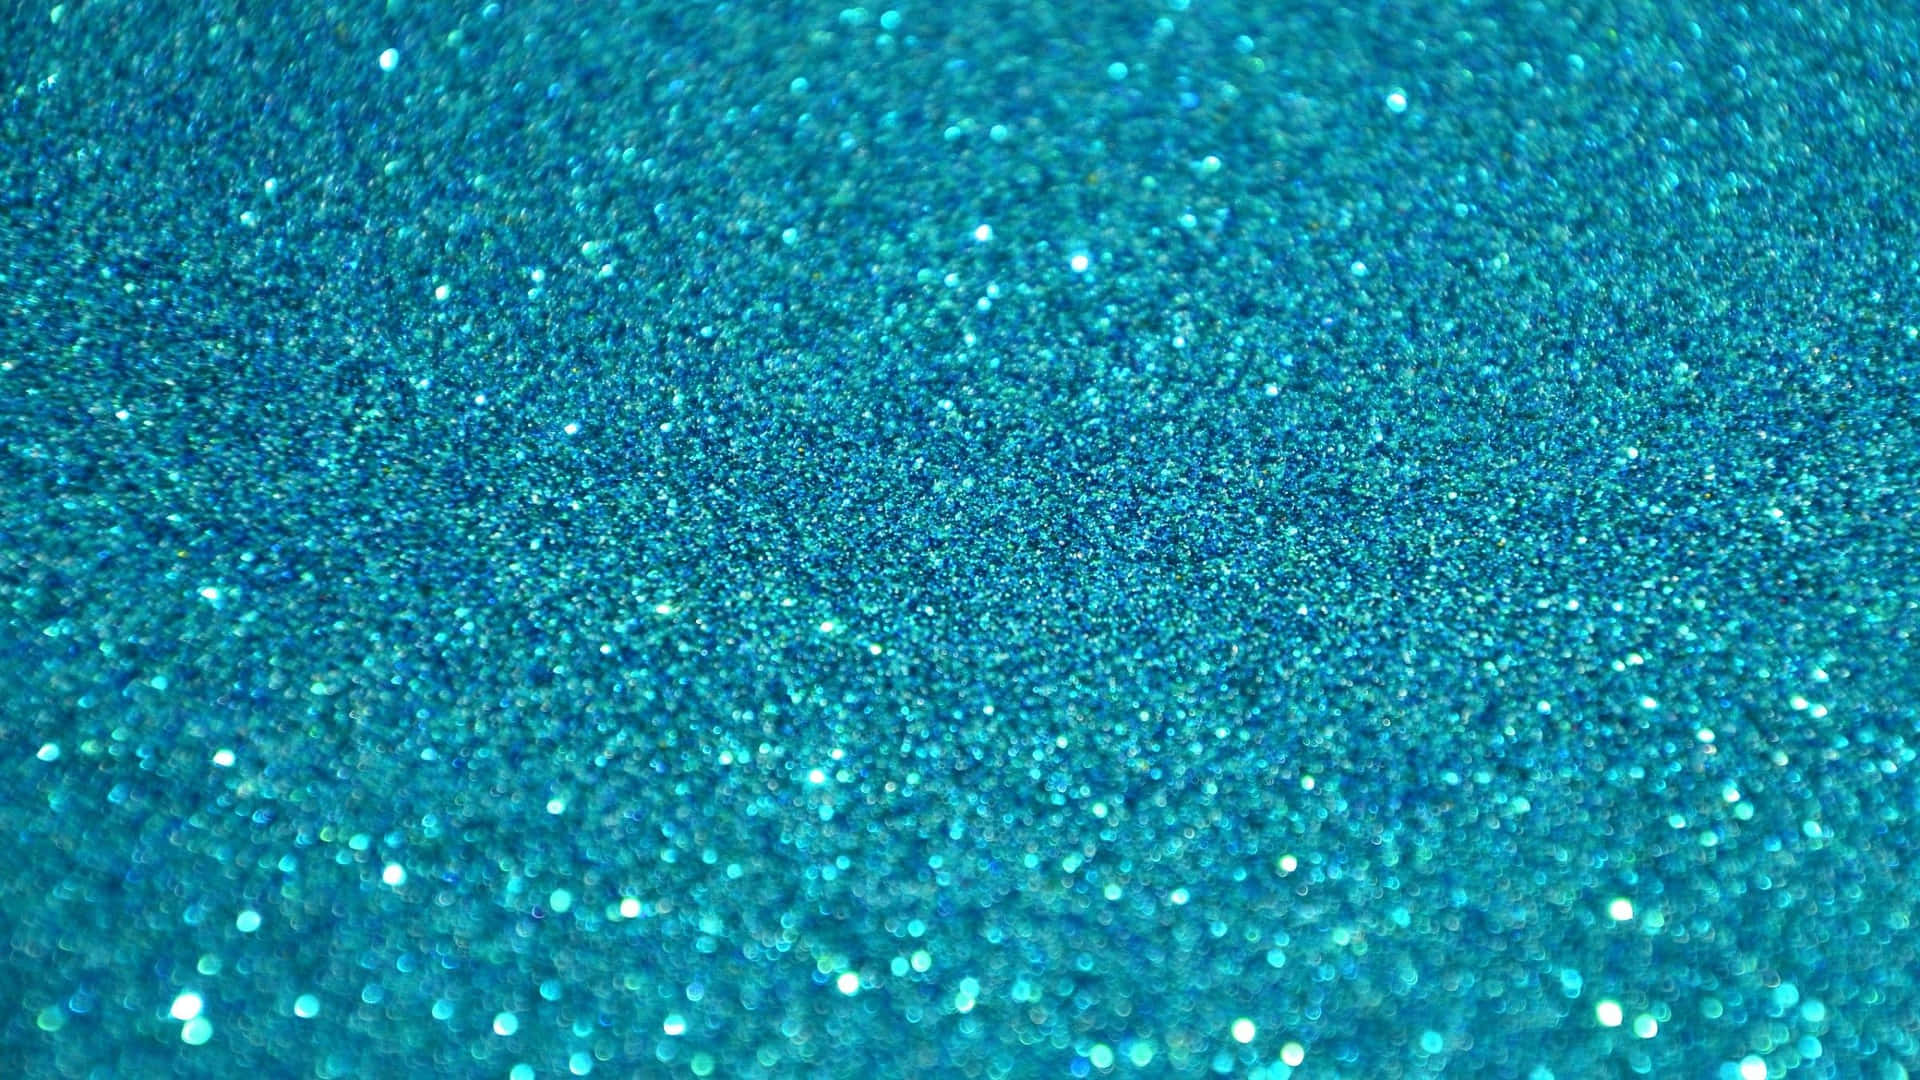 Shine Brightly with this Teal Glitter Background